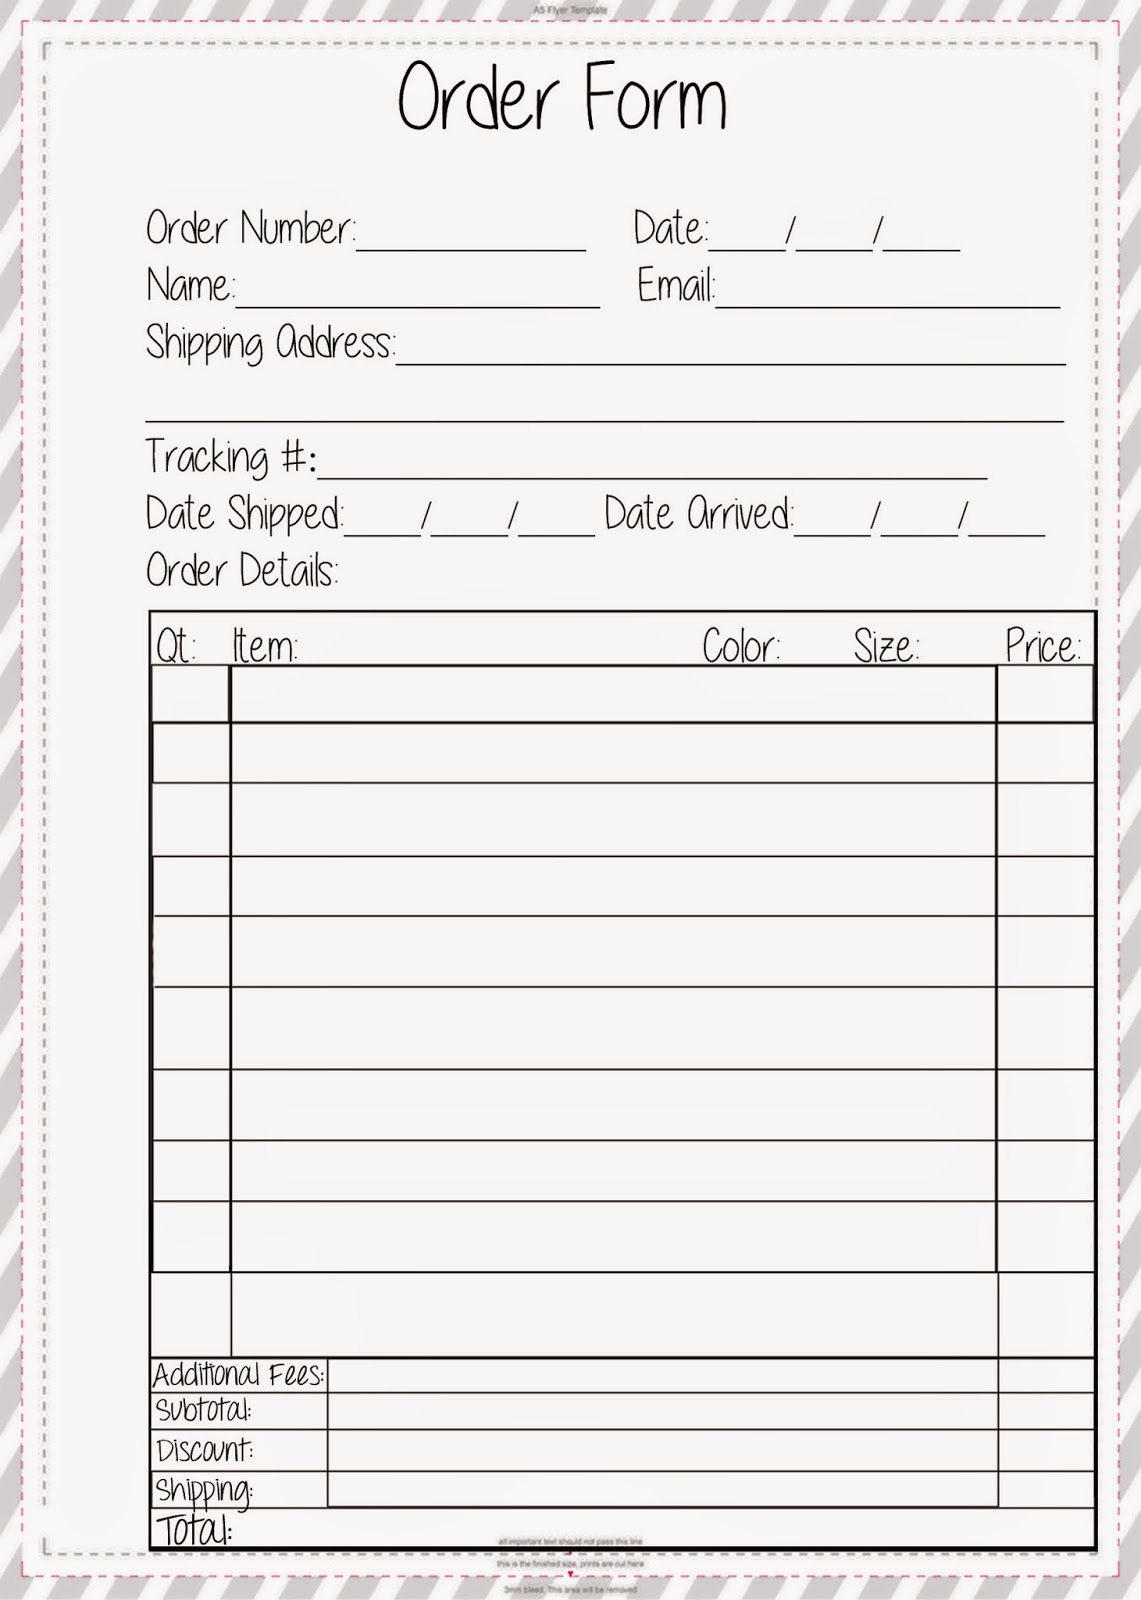 printable-order-form-template-free-download-printable-forms-free-online